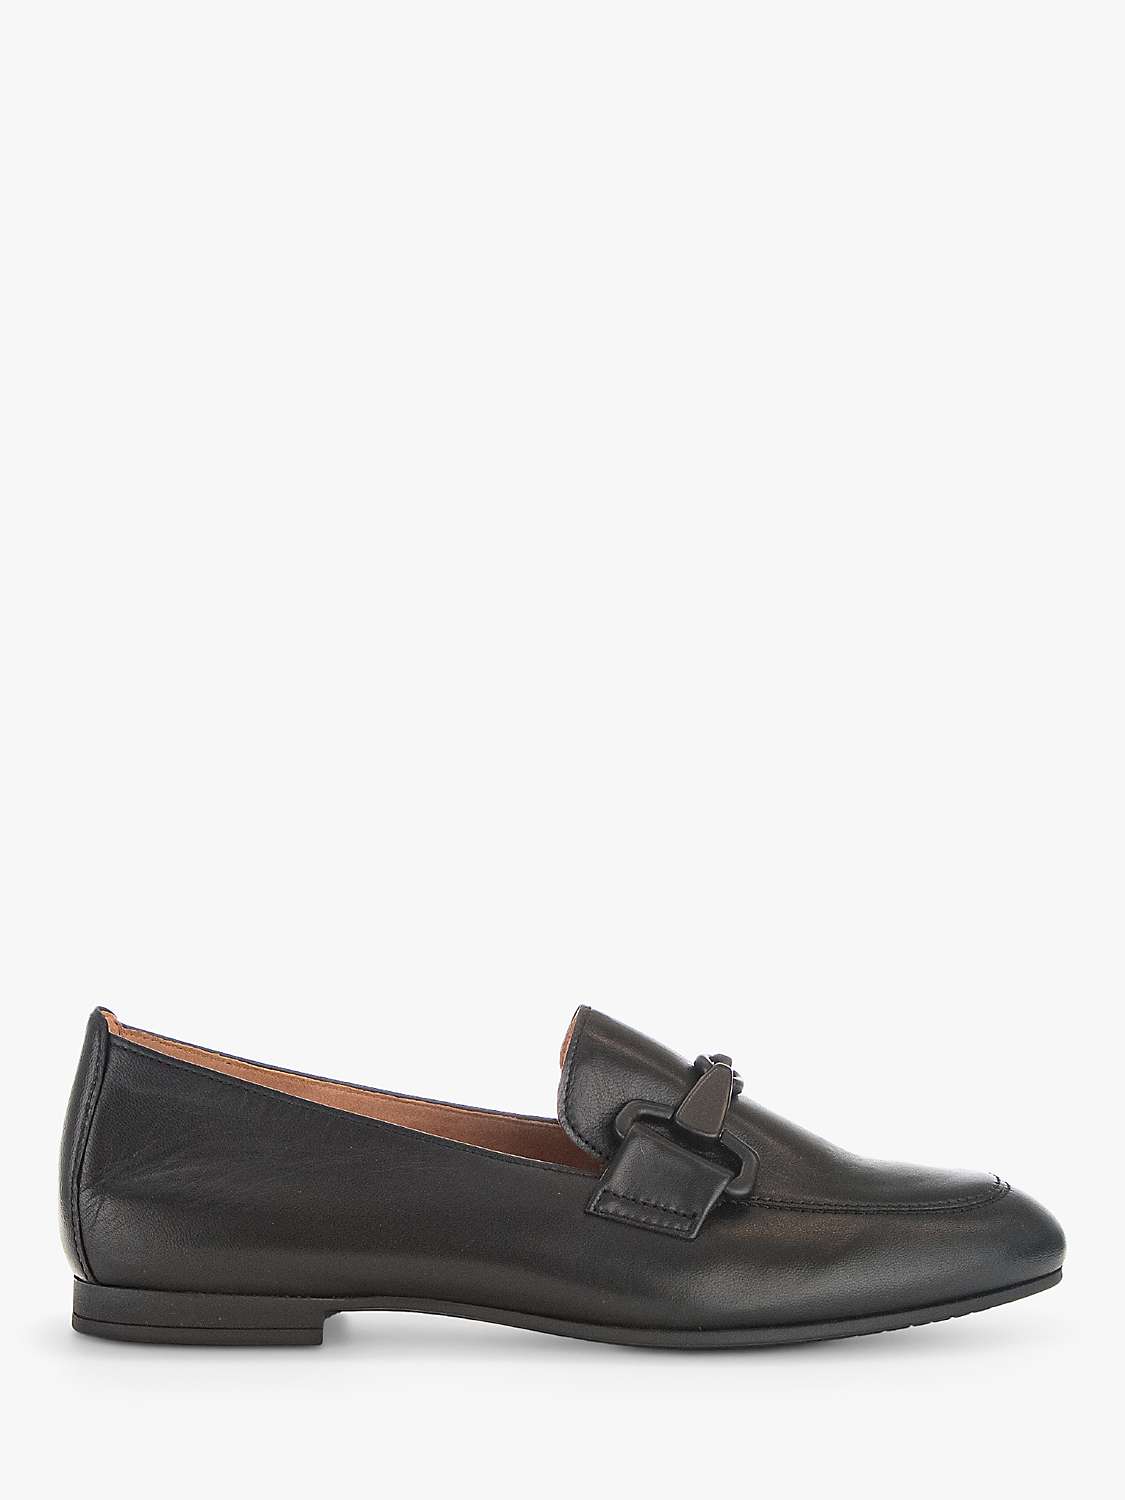 Gabor Jangle Leather Loafers, Black at John Lewis & Partners